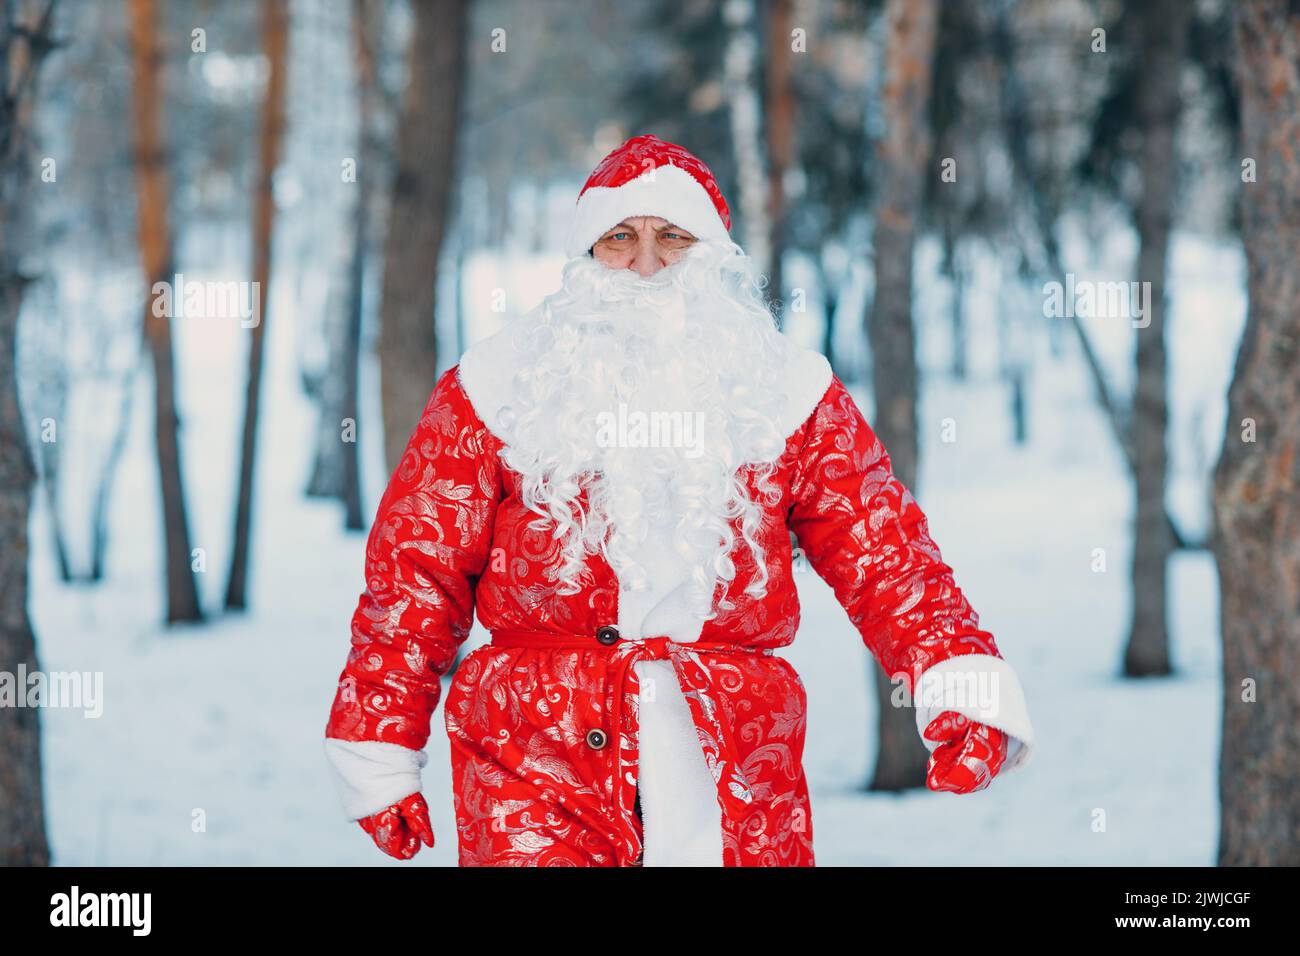 Santa Claus with long white beard walking in the winter forest. Stock Photo